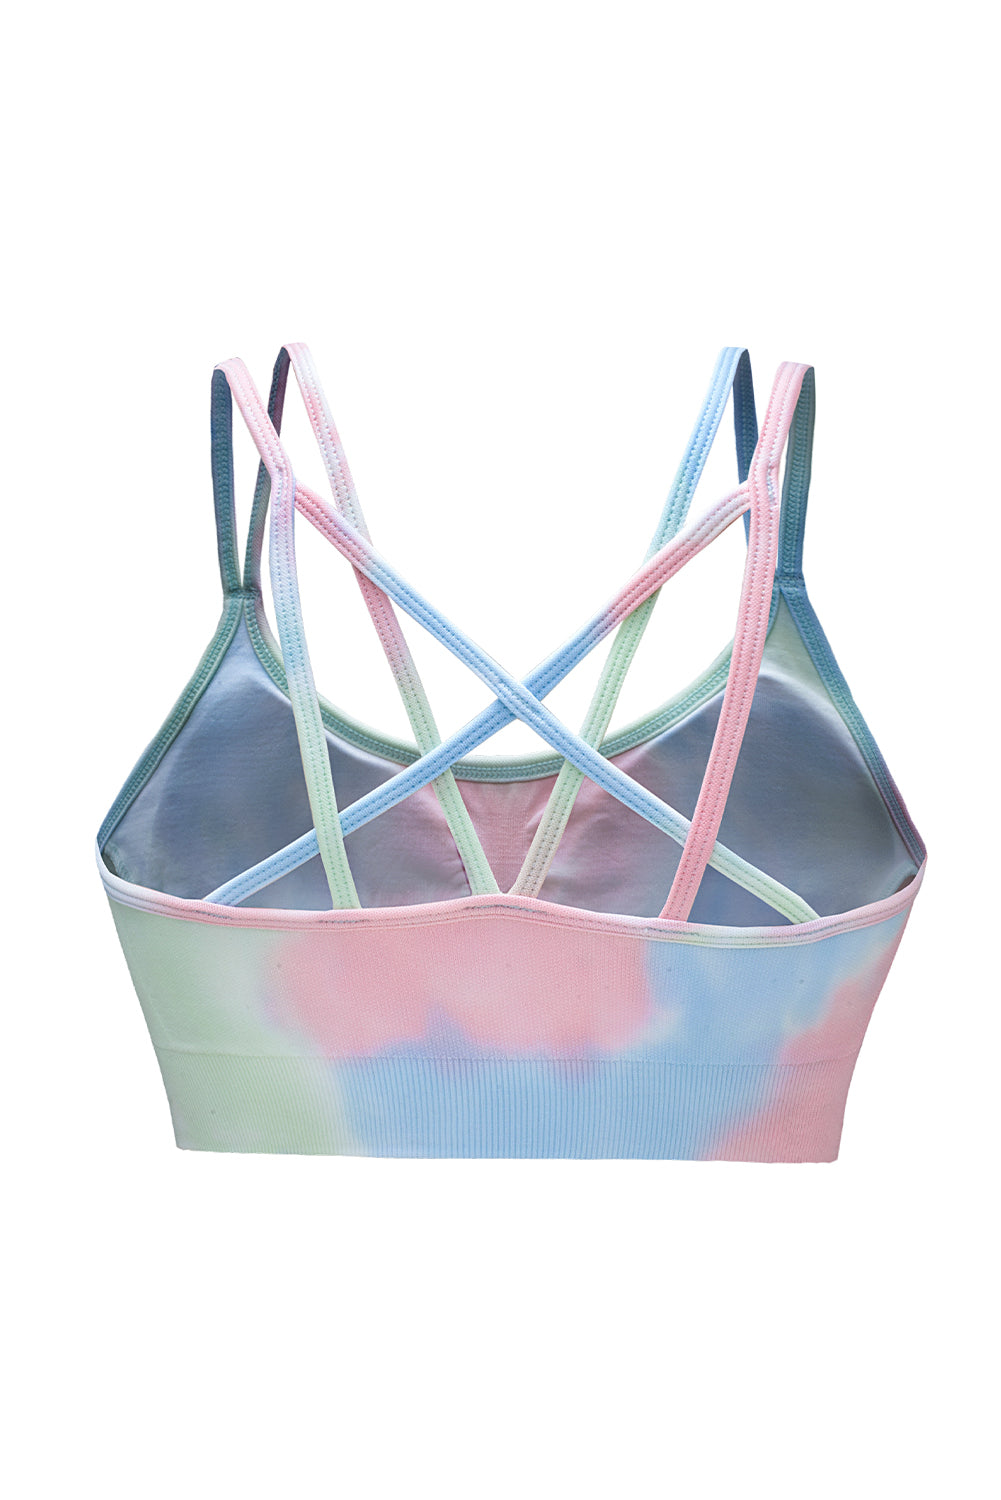 Tie-Dye  Double-Strap Sports Top  Sunset and Swim   